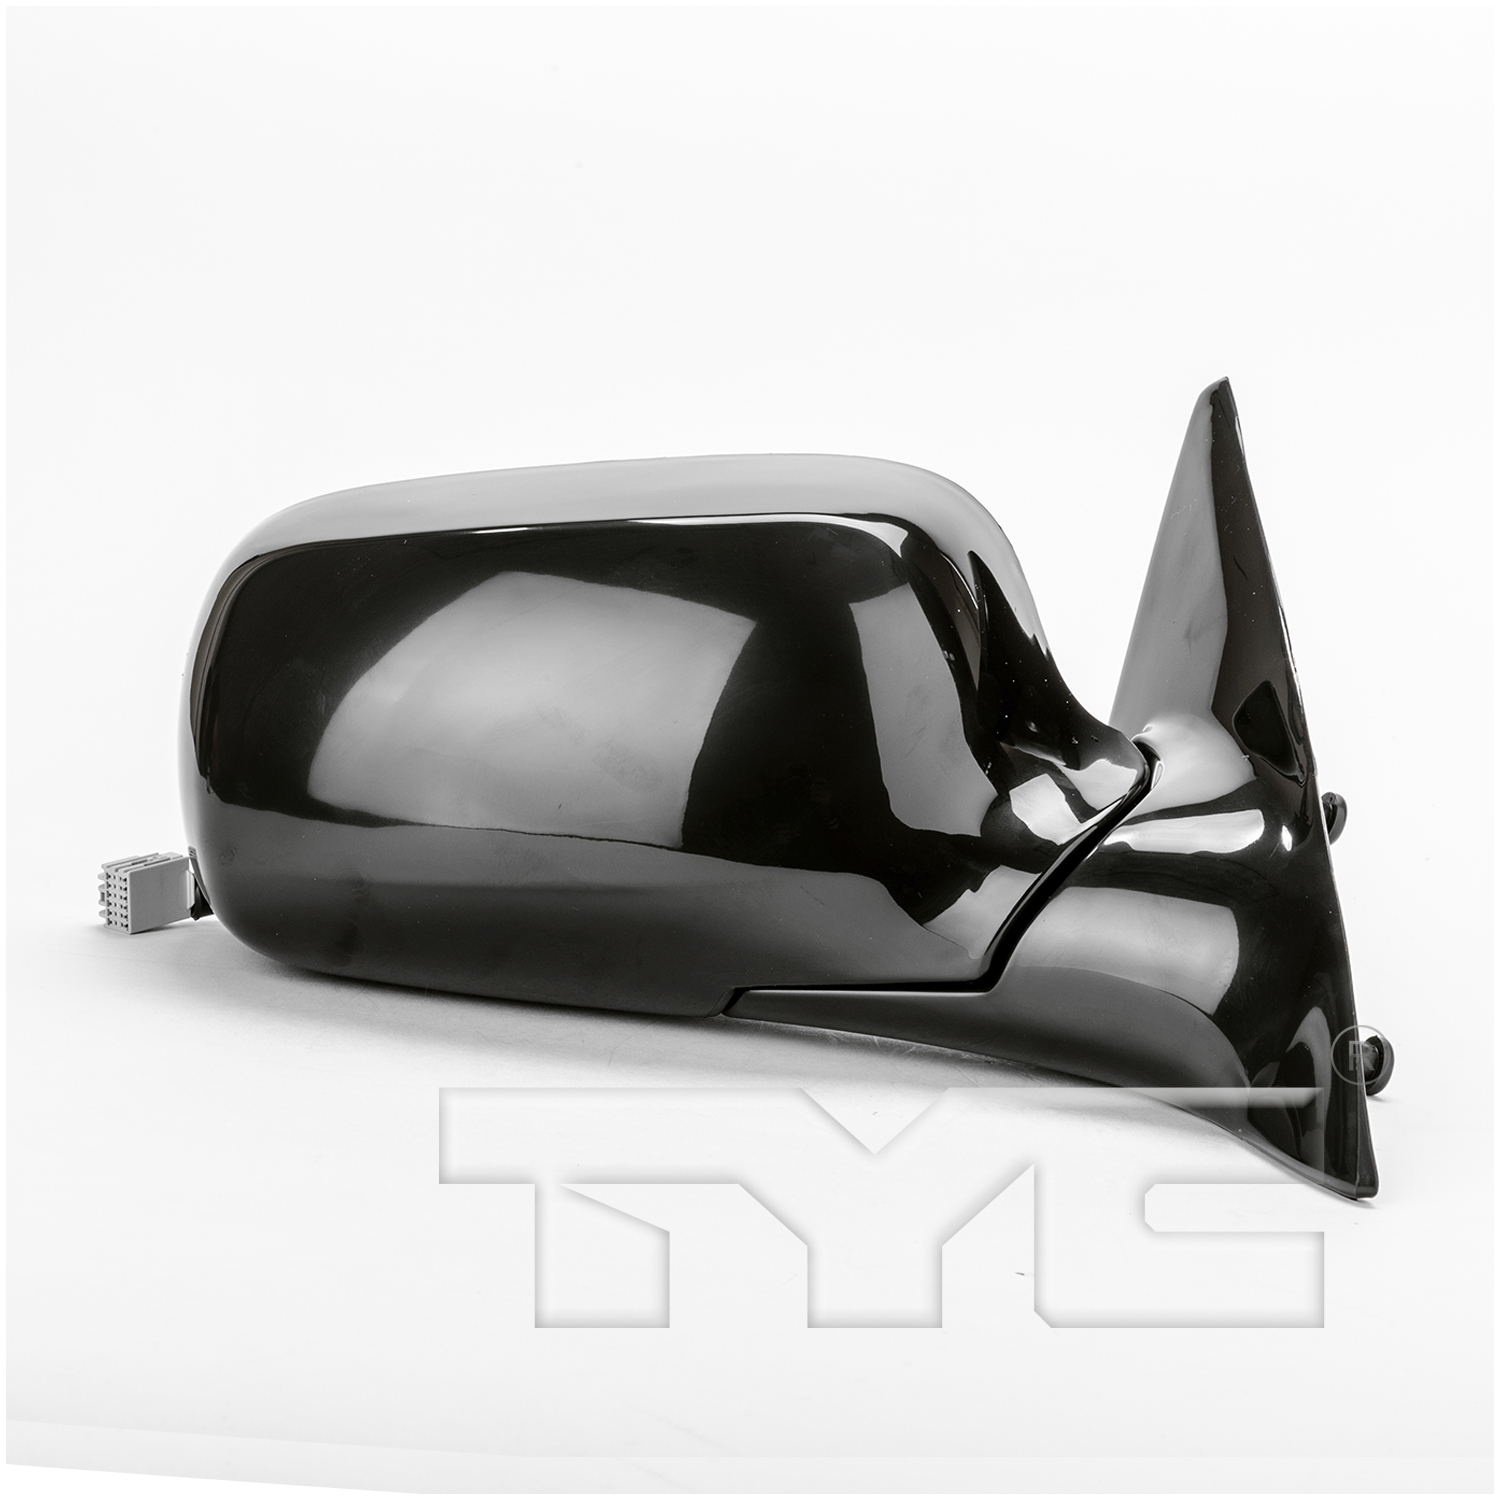 Aftermarket MIRRORS for BUICK - LUCERNE, LUCERNE,06-11,RT Mirror outside rear view